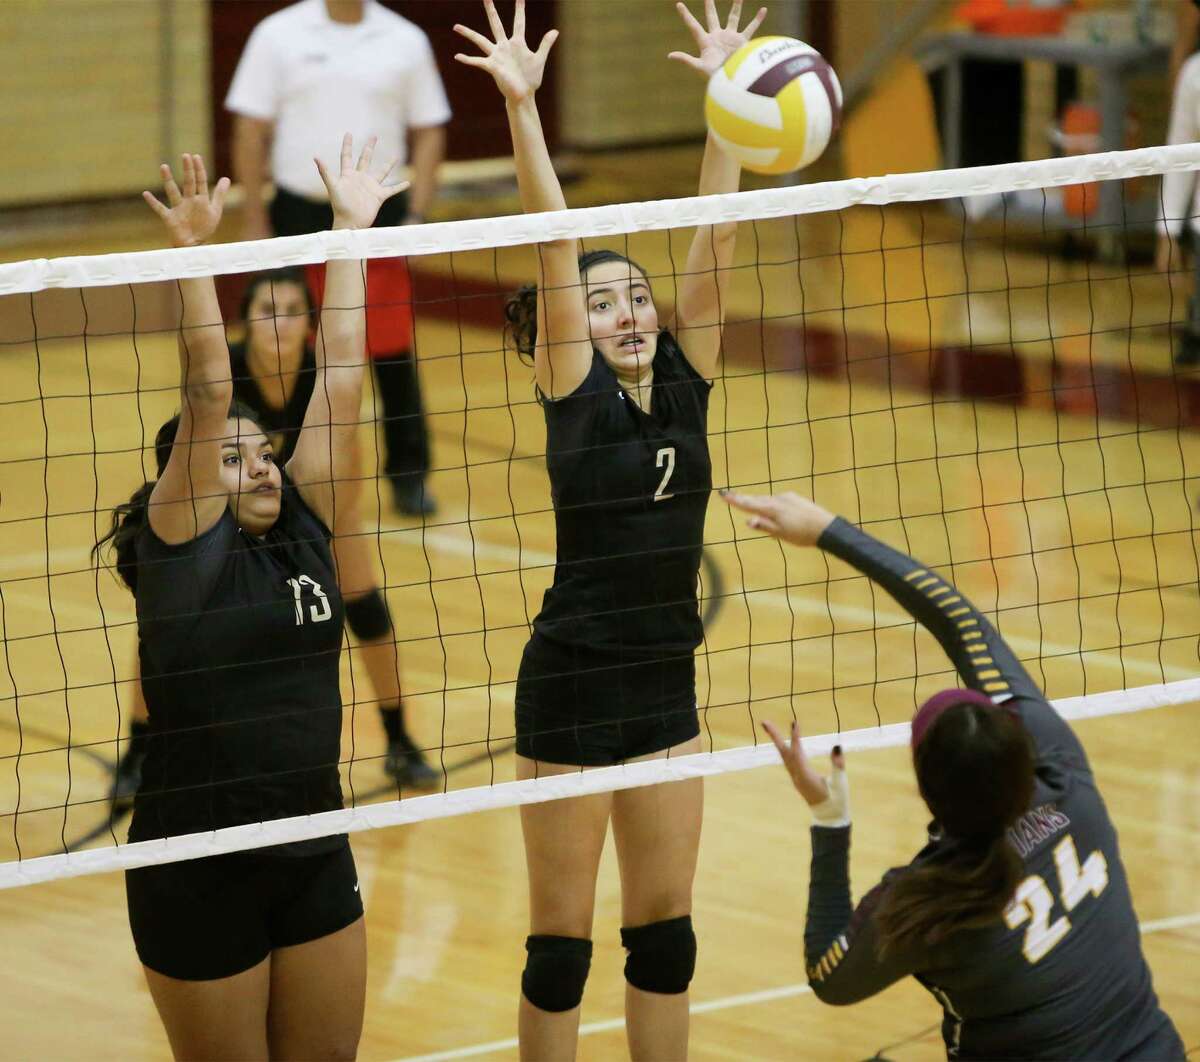 Edison's Nayelli Hernandez (from left) and Liann Mayen attempt to block a shot by Harlandale's Tanya Ramos during their match at Harlandale on Tuesday, Sept. 8, 2015. Edison won the match 3-2. MARVIN PFEIFFER/ mpfeiffer@express-news.net